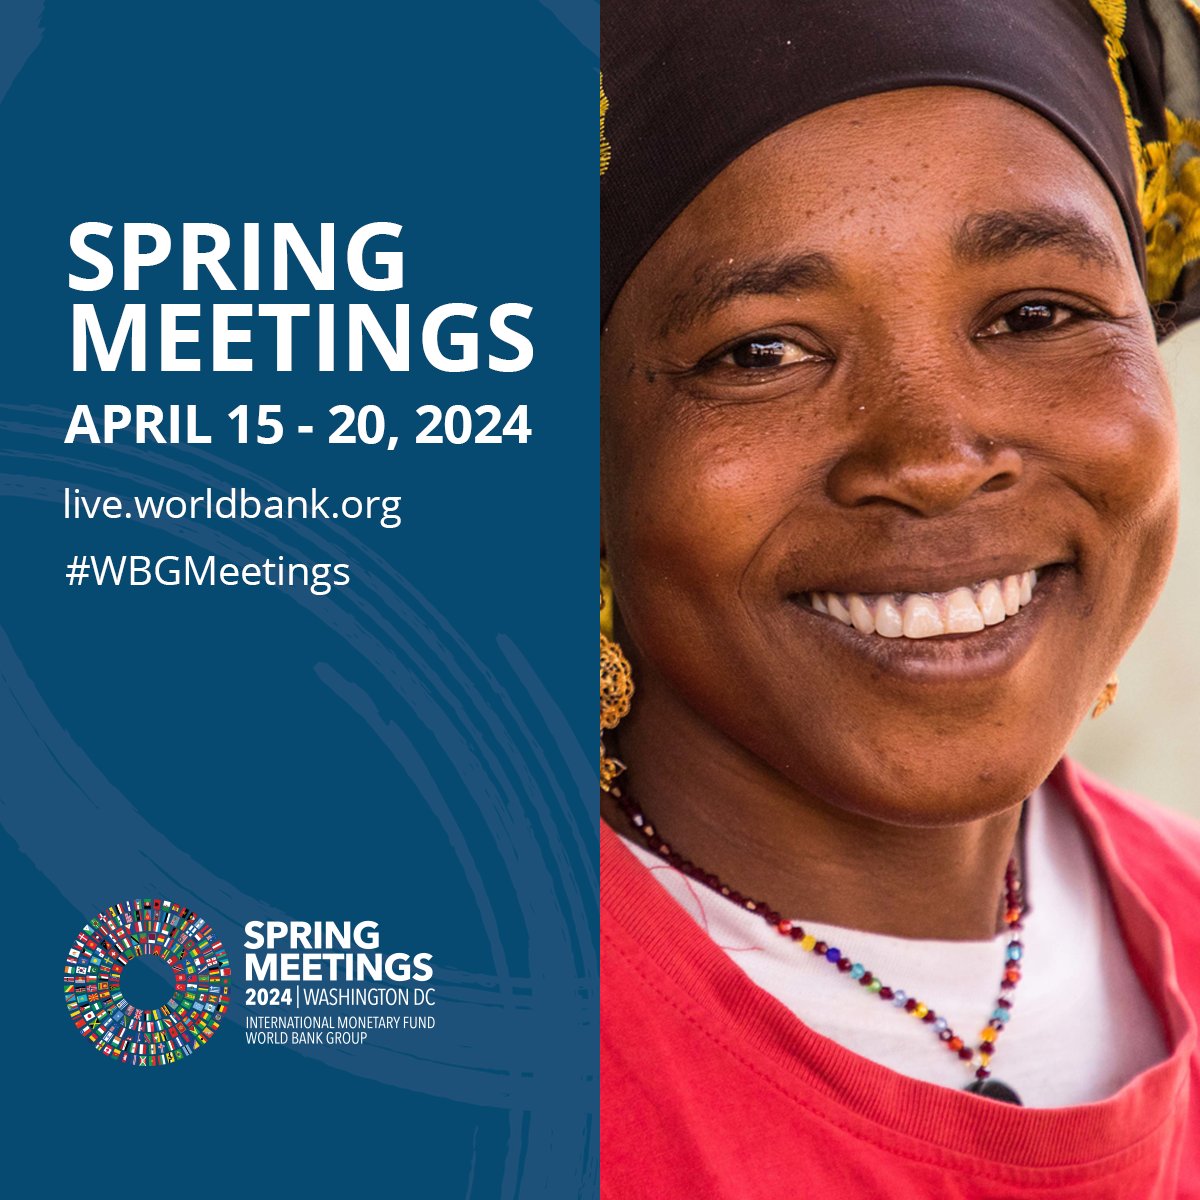 Join leaders from the global development community at this year’s @‌WorldBank - @‌IMFNews Spring Meetings! Sign up now to join our online events: wrld.bg/c0mL50ReEkL #GlobalDev #WBGMeetings